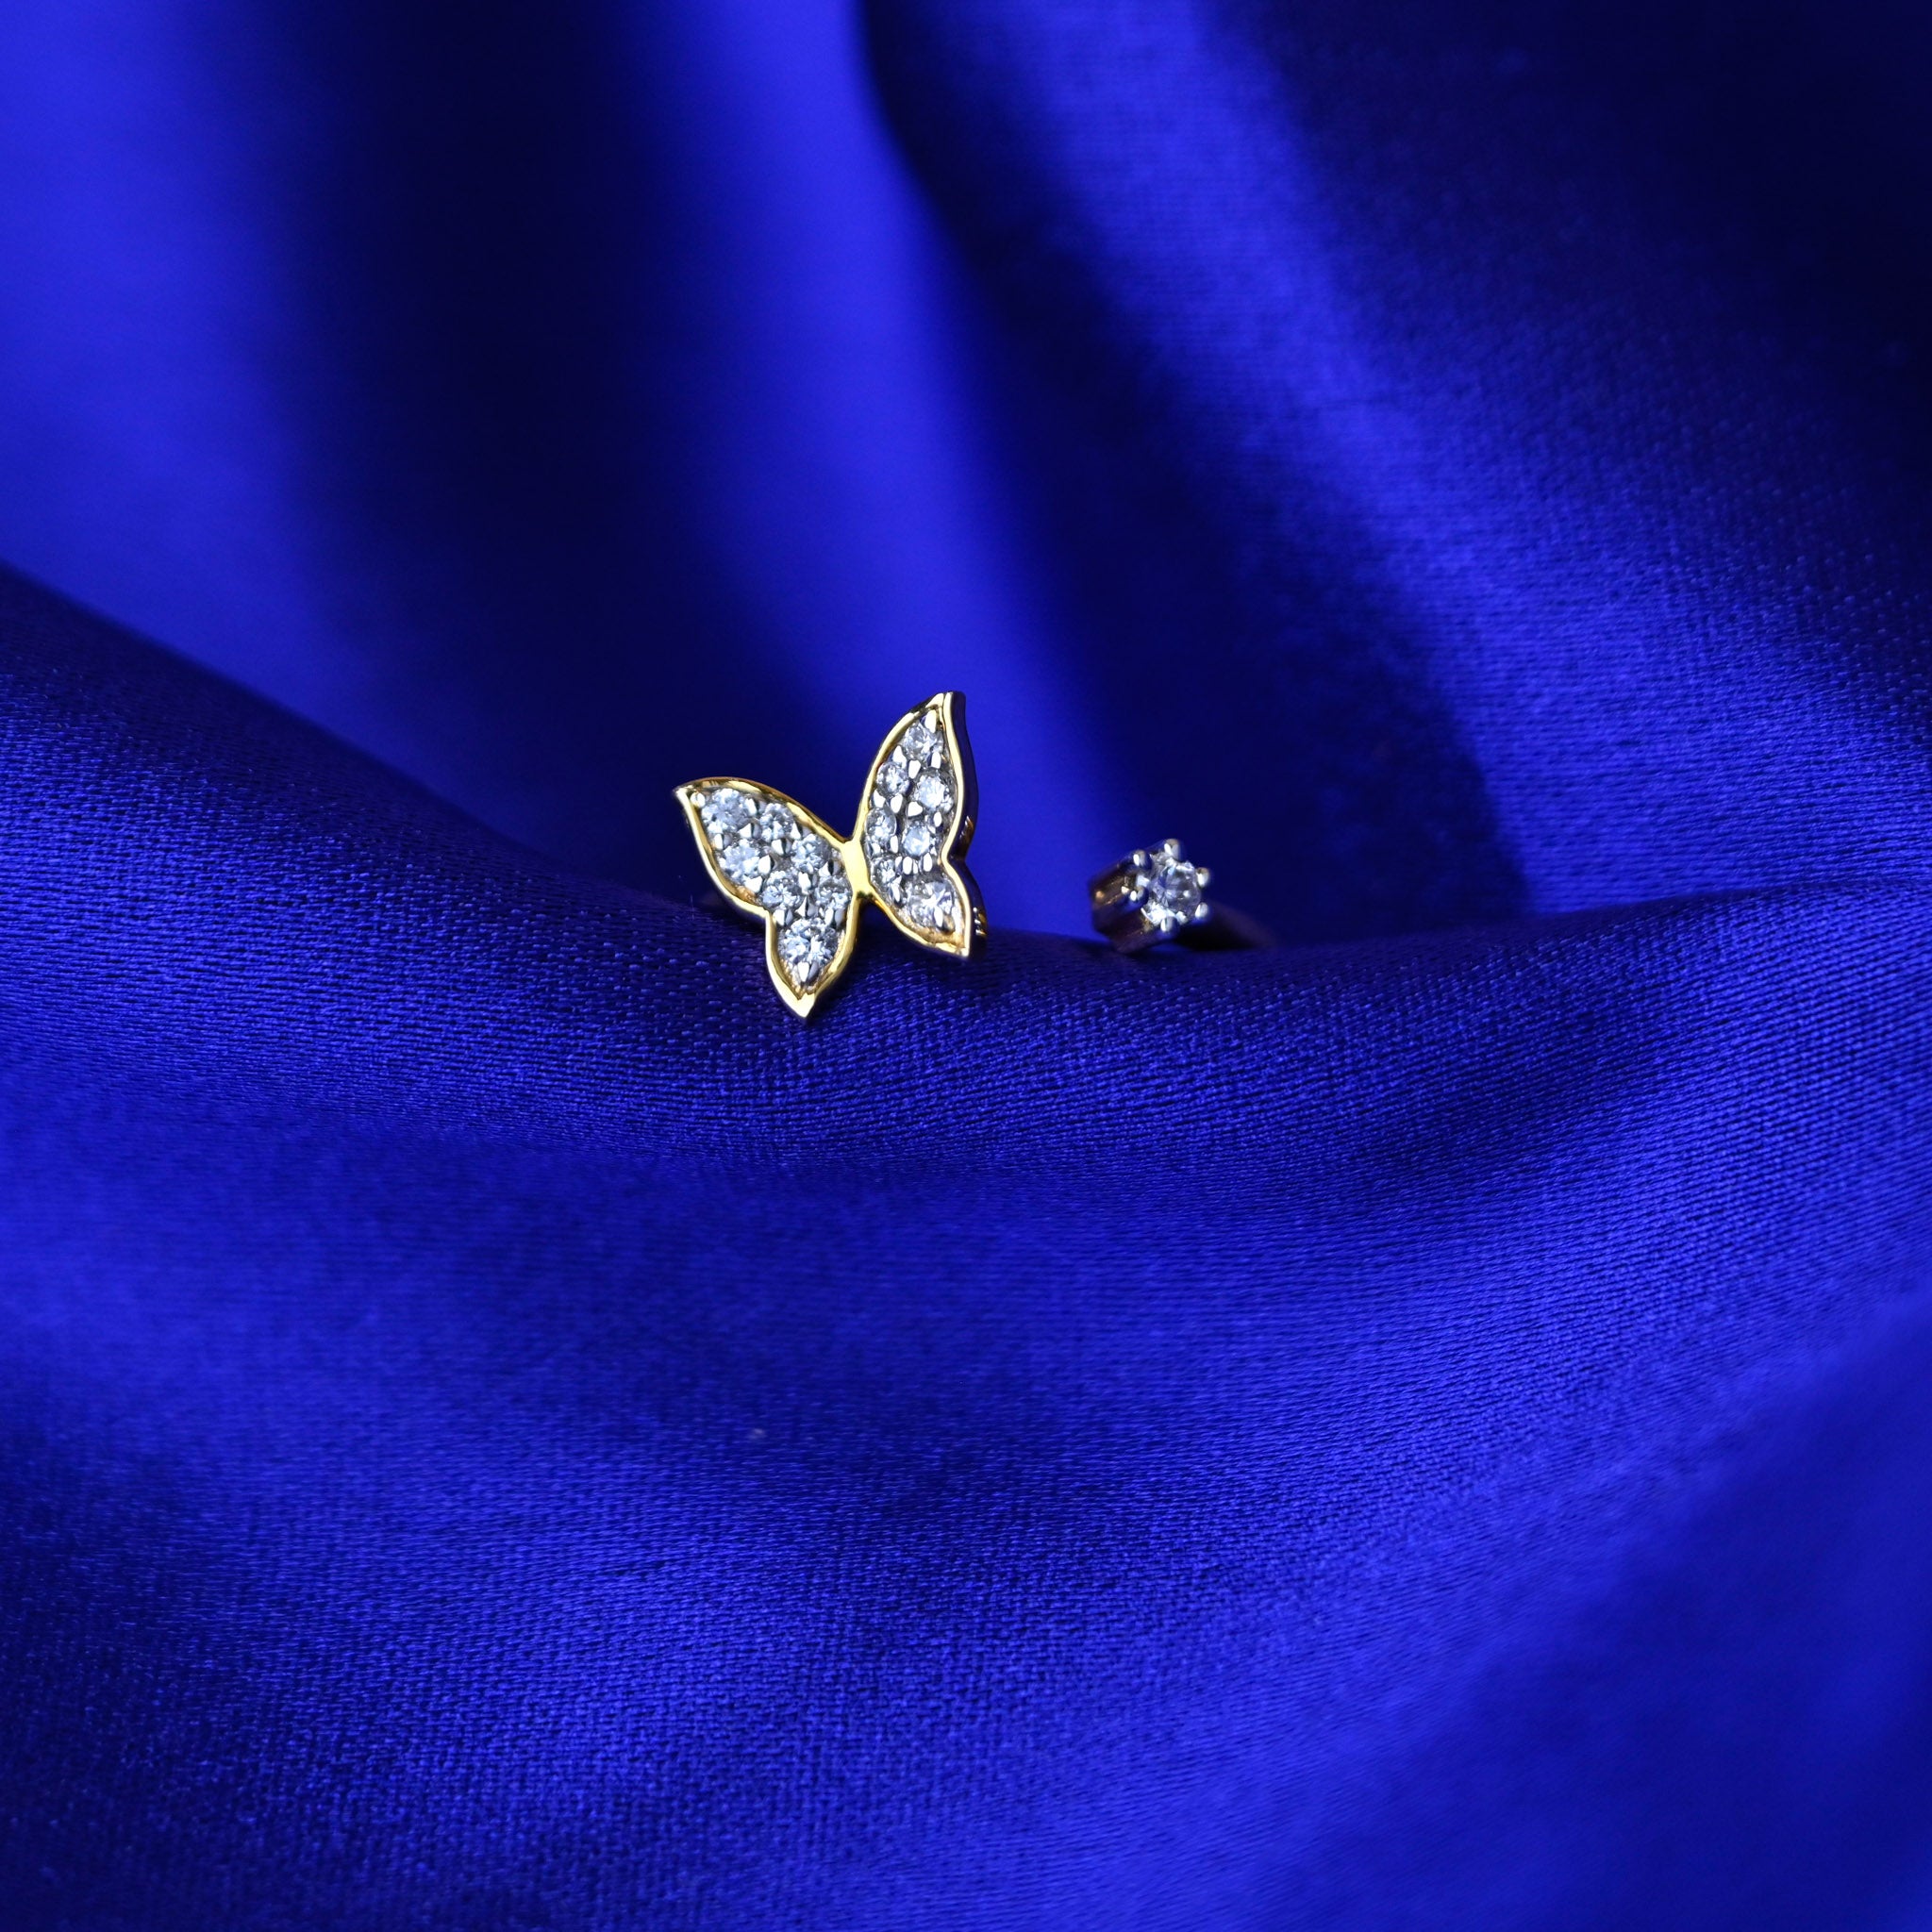 The Butterfly's Kiss - Ring